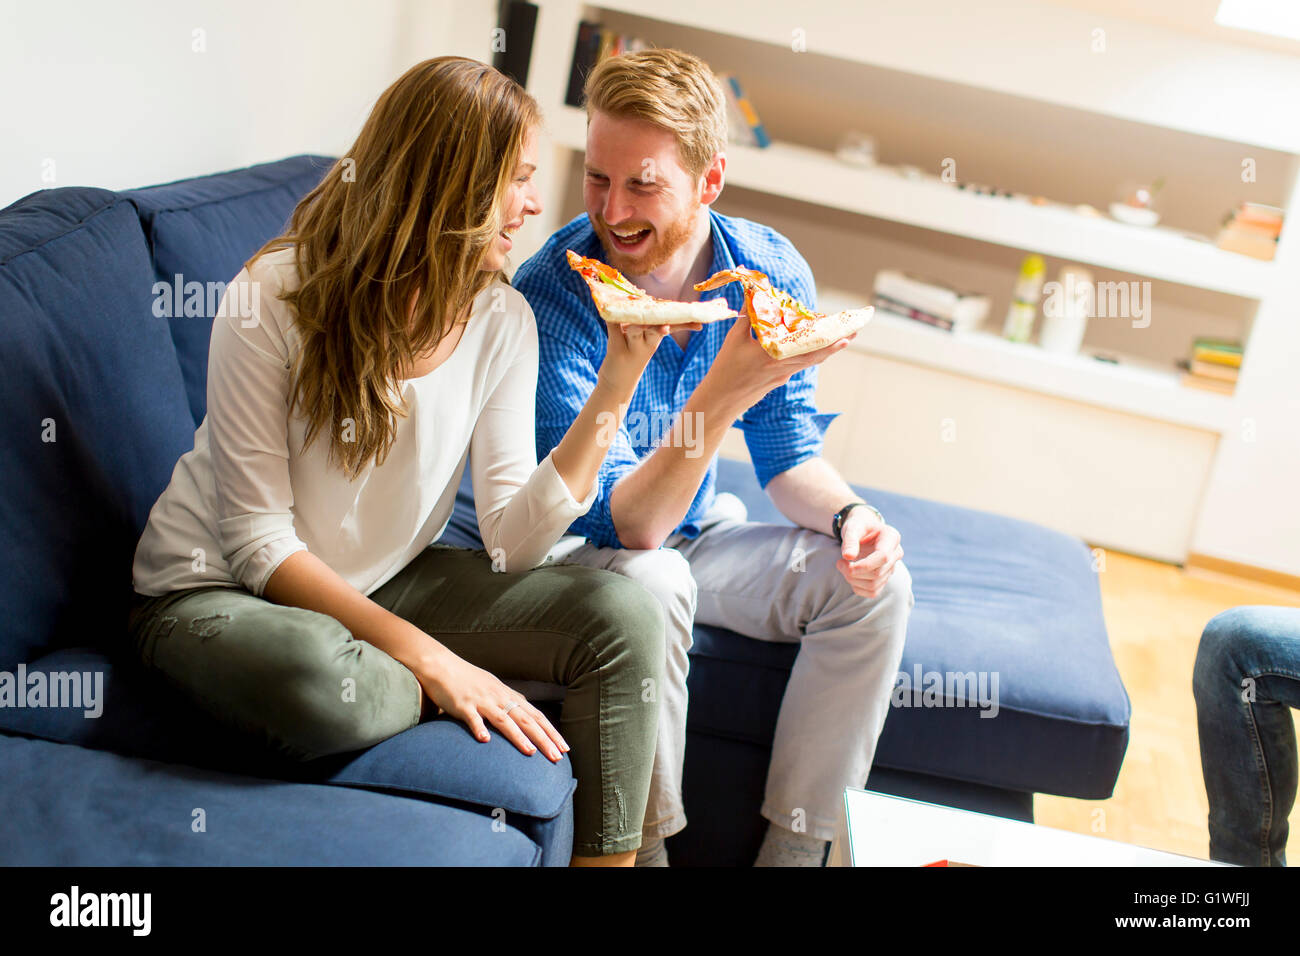 Couple eating pizza in the living room Stock Photo